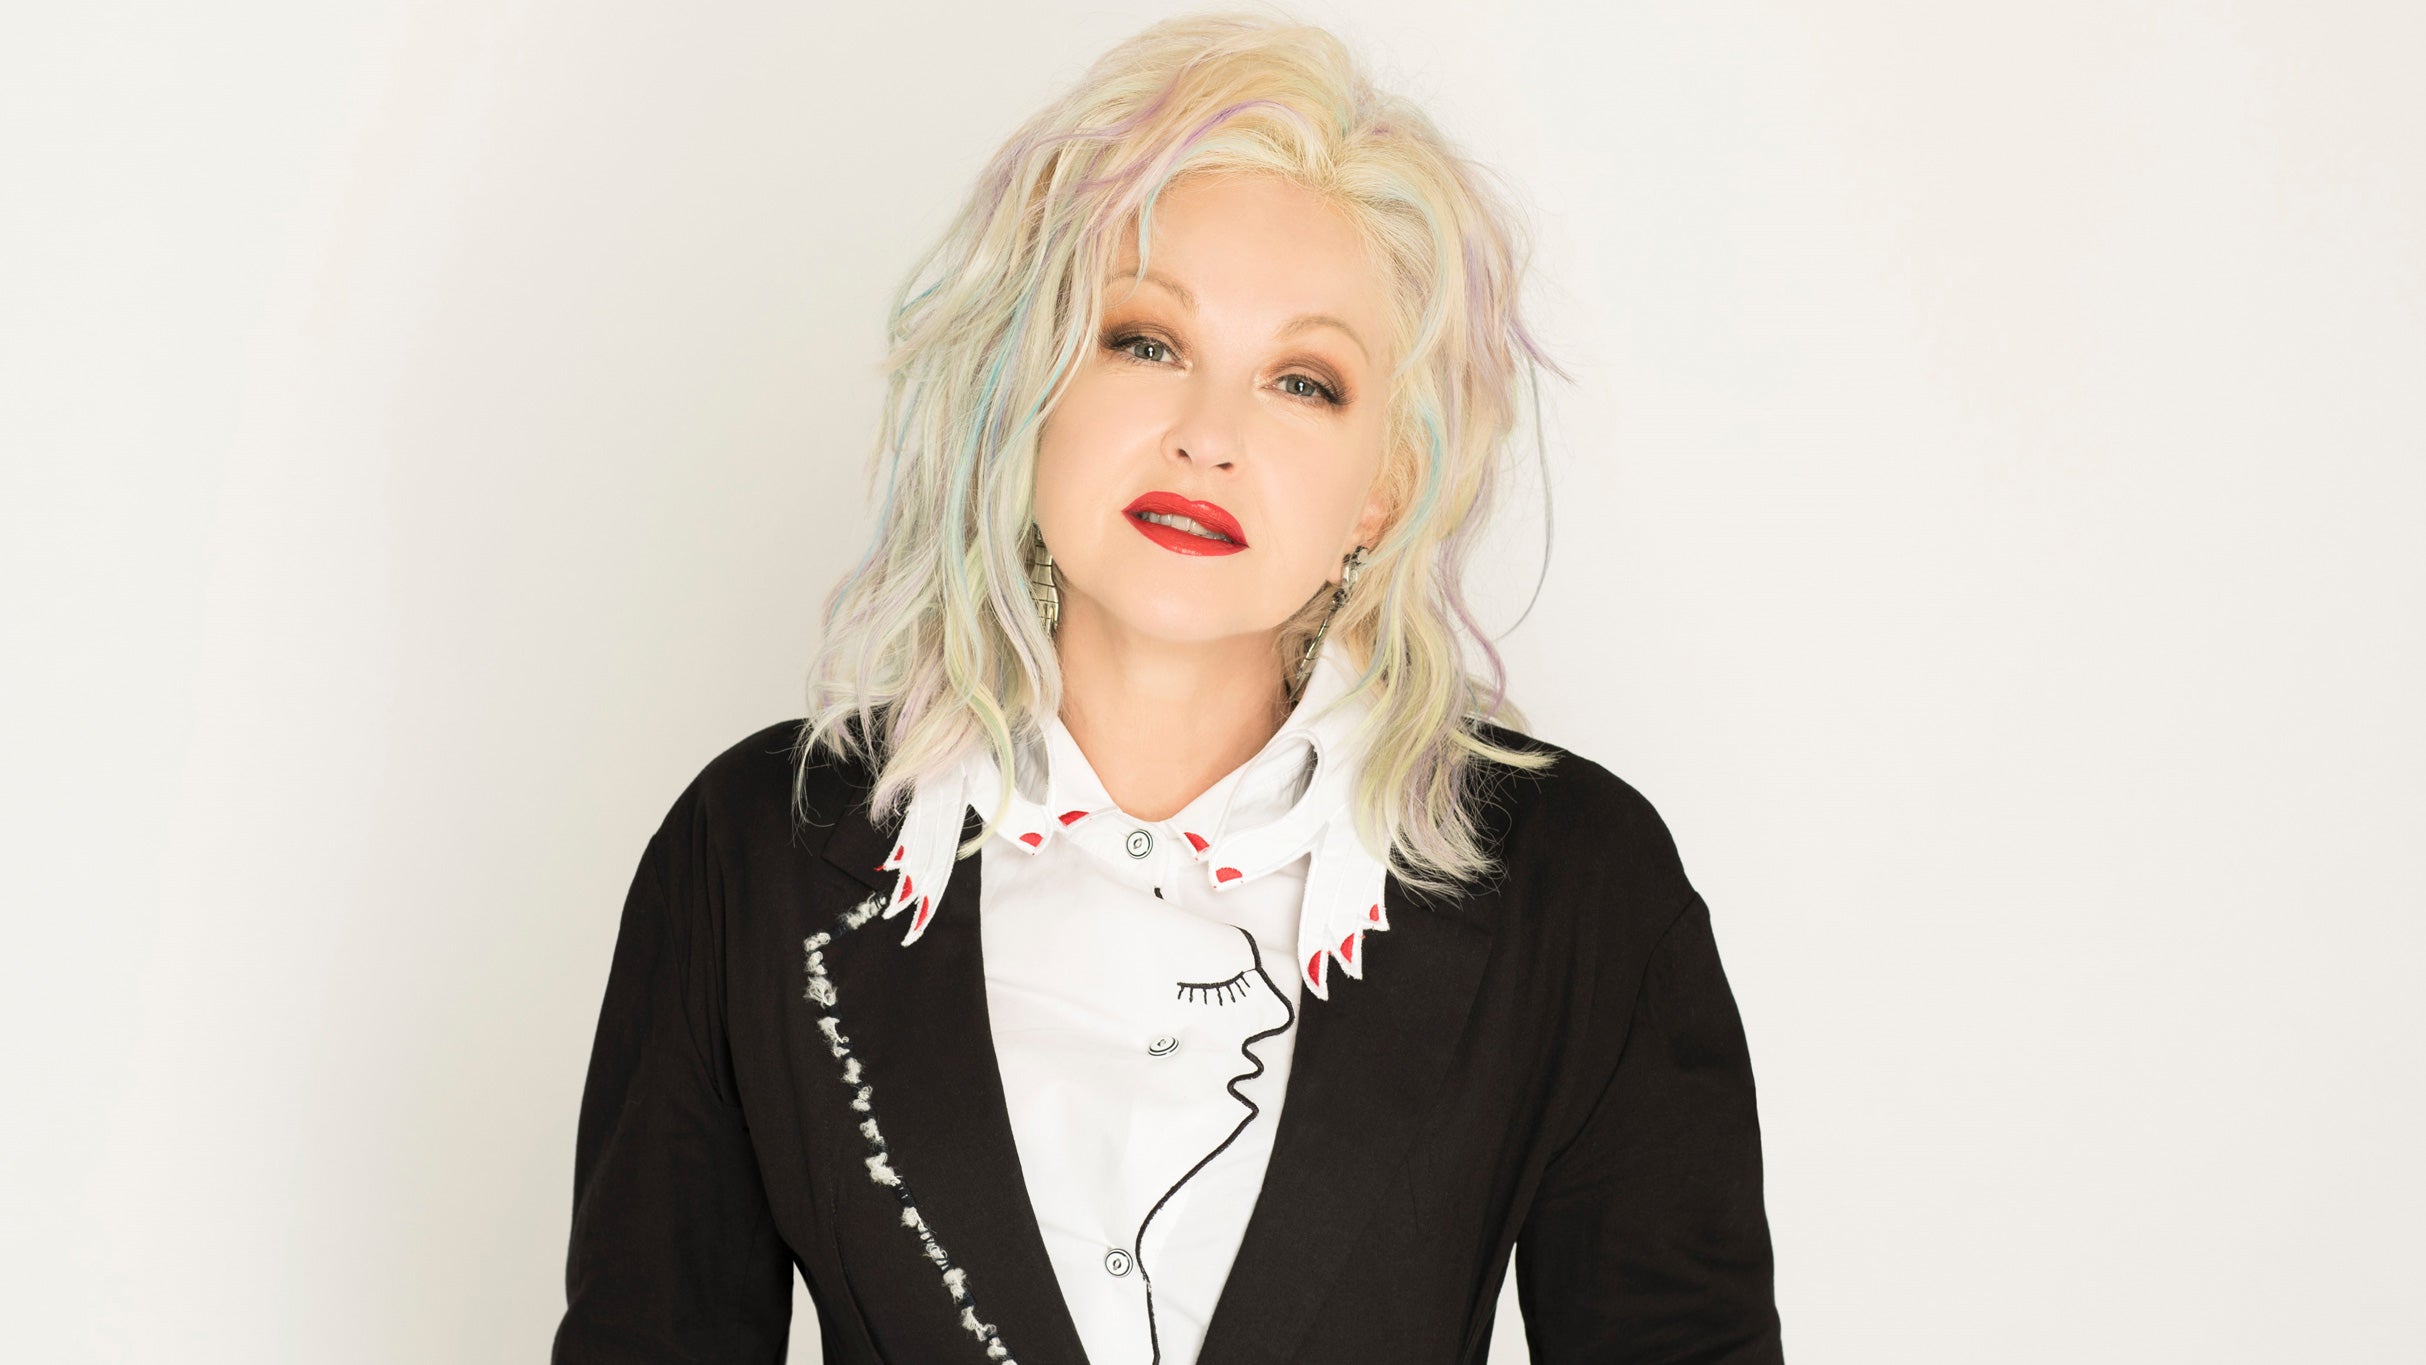 Cyndi Lauper in London promo photo for Ticketmaster presale offer code